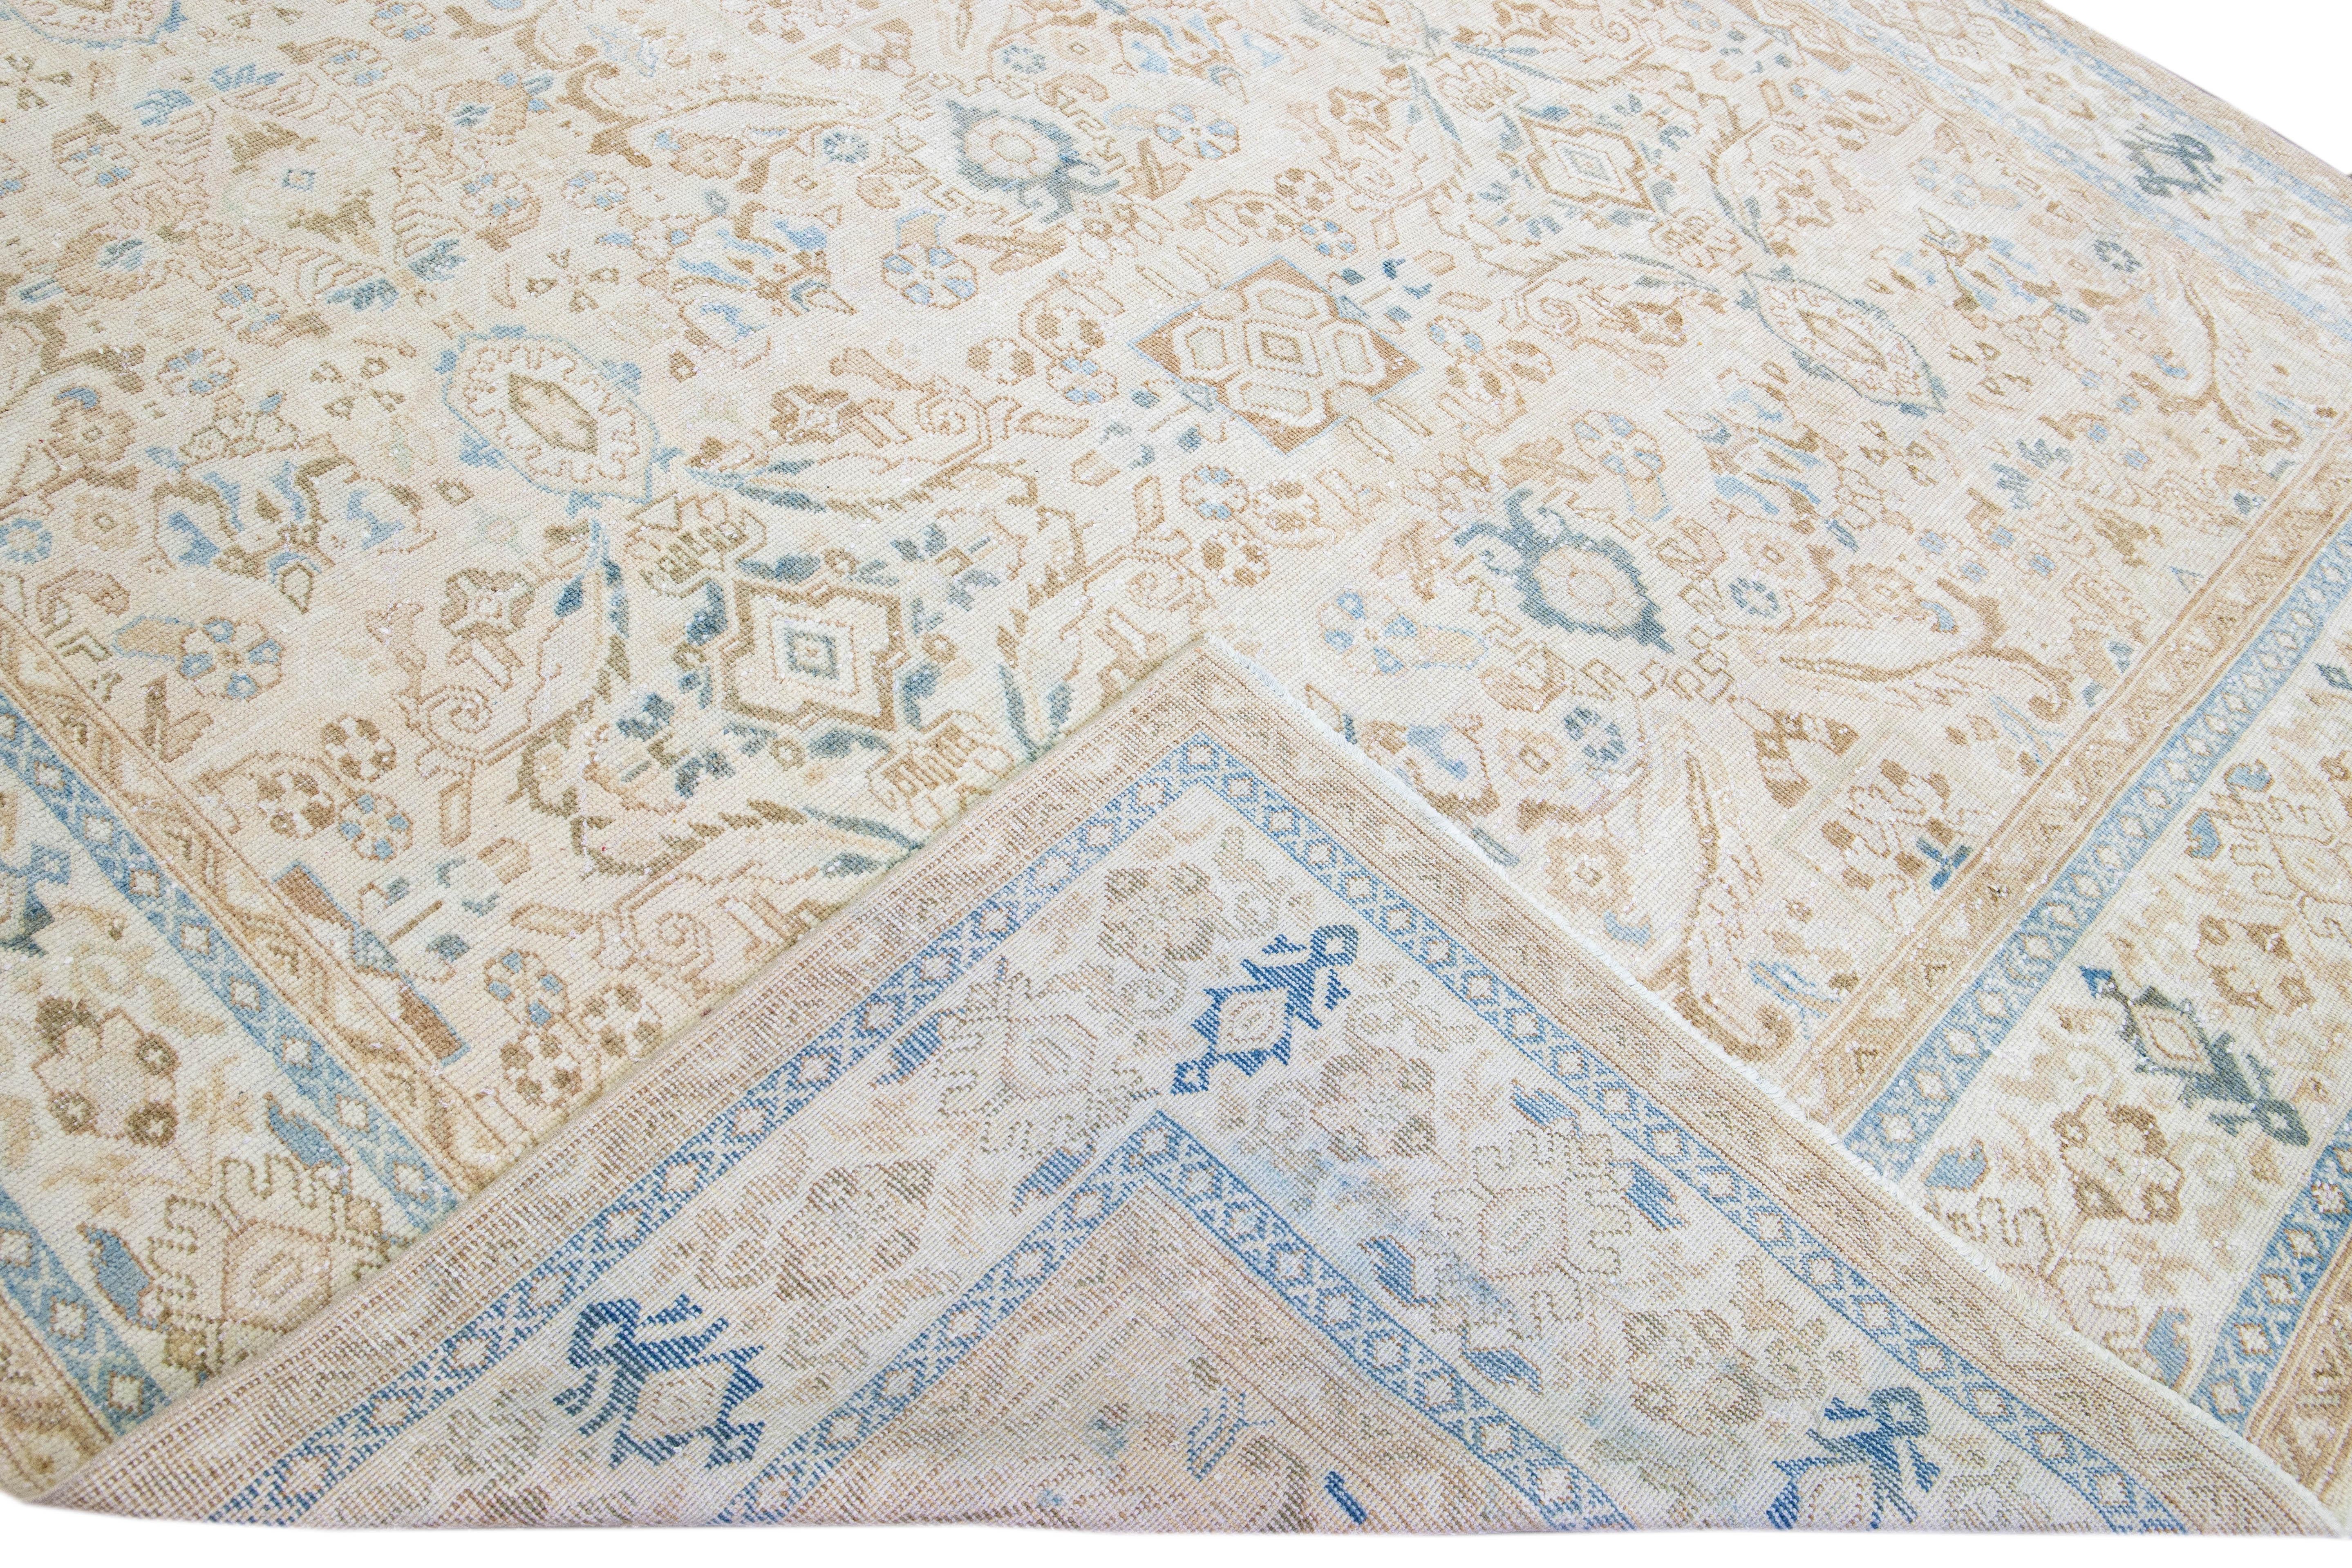 Beautiful hand-knotted antique Mahal wool rug with the Beige field. This Persian rug has blue and tan accents featuring a traditional floral pattern design. 

This rug measures 9'3